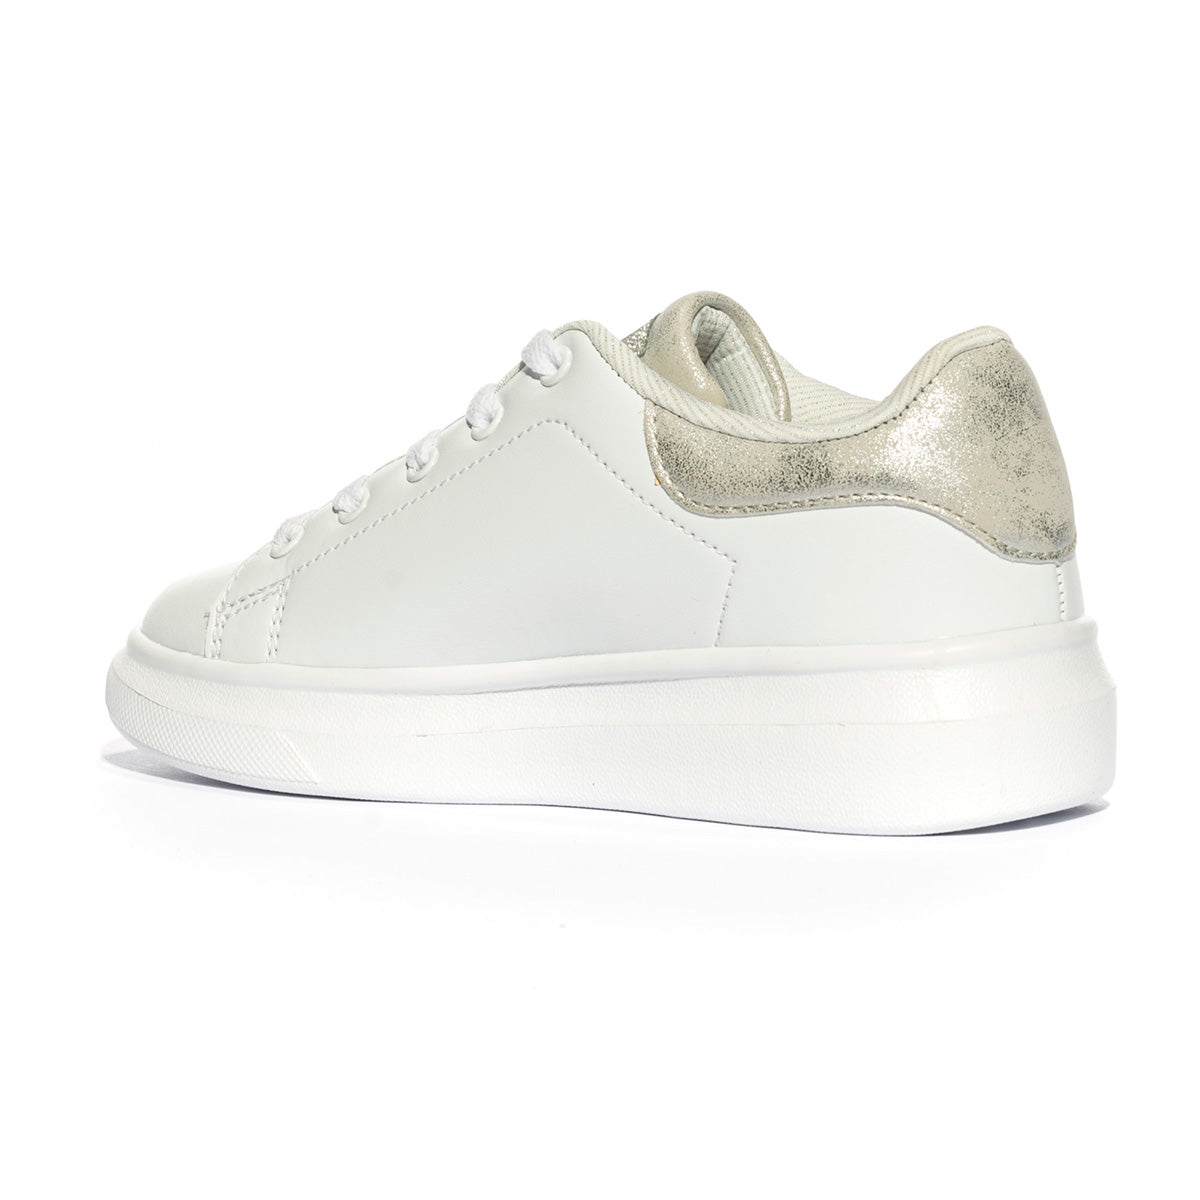 Sneakers Miss Sixty Sms827 Bianche